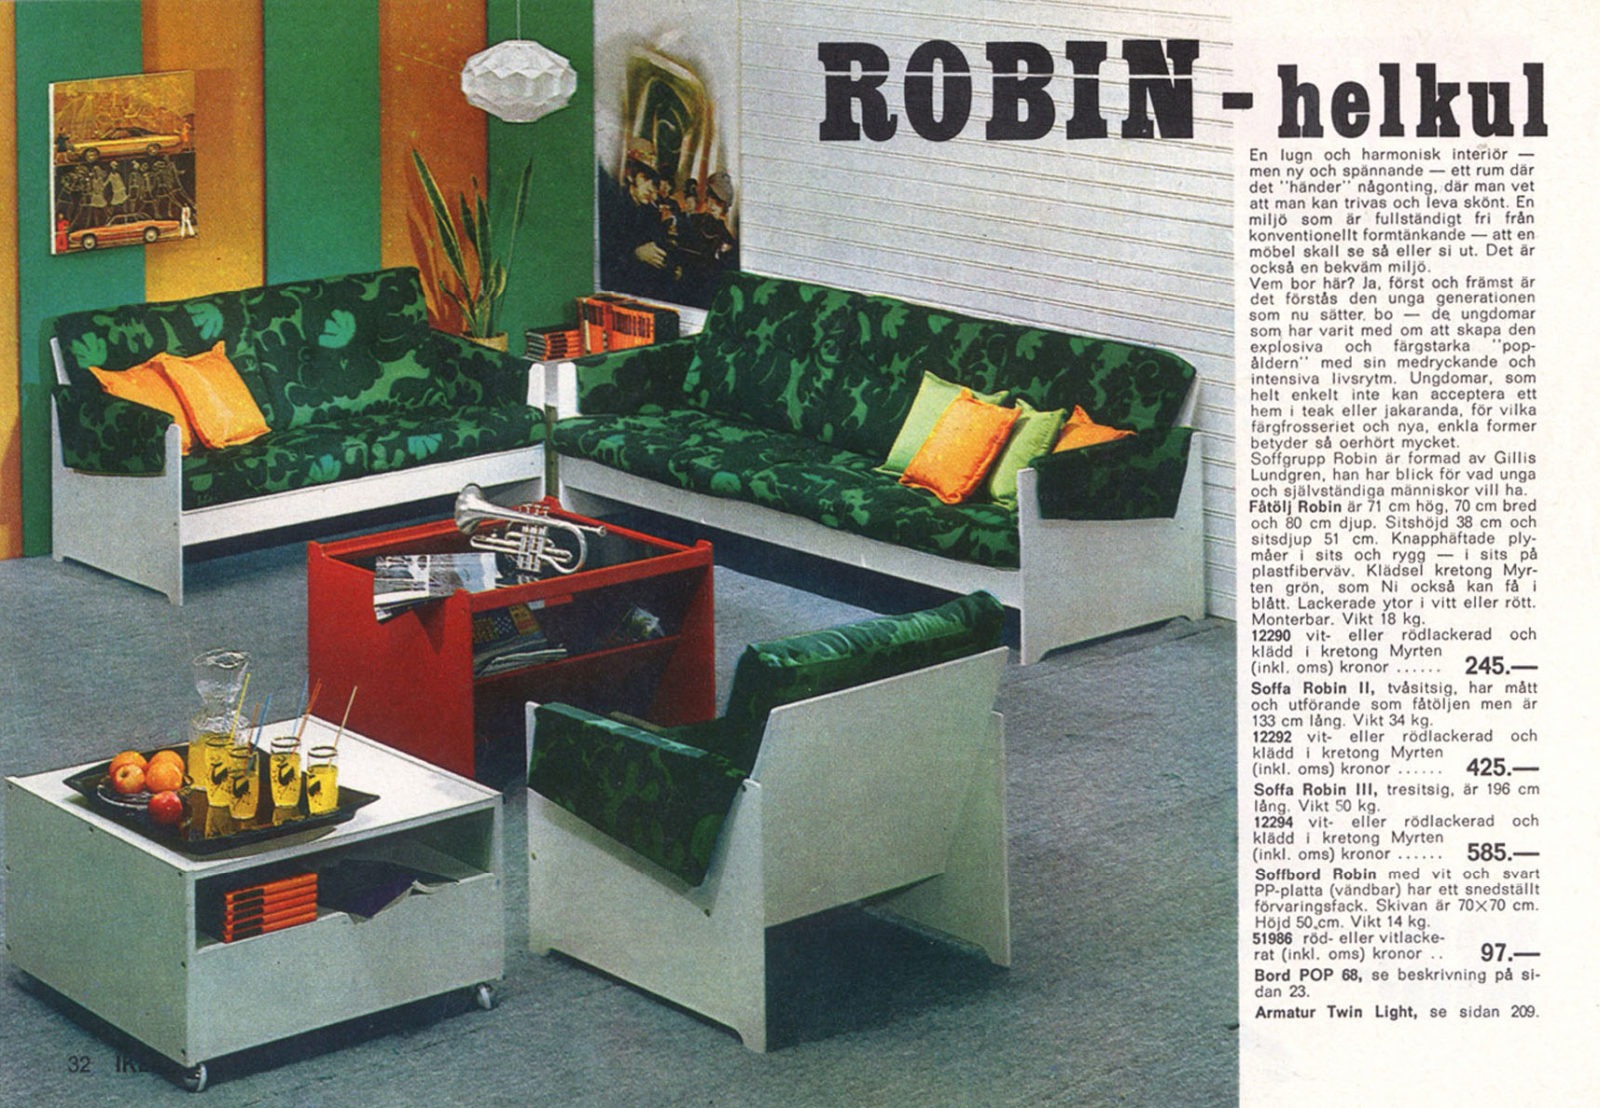 Catalogue spread with youthful decor, low wooden sofas with green floral pattern on cushions, a red table with storage.